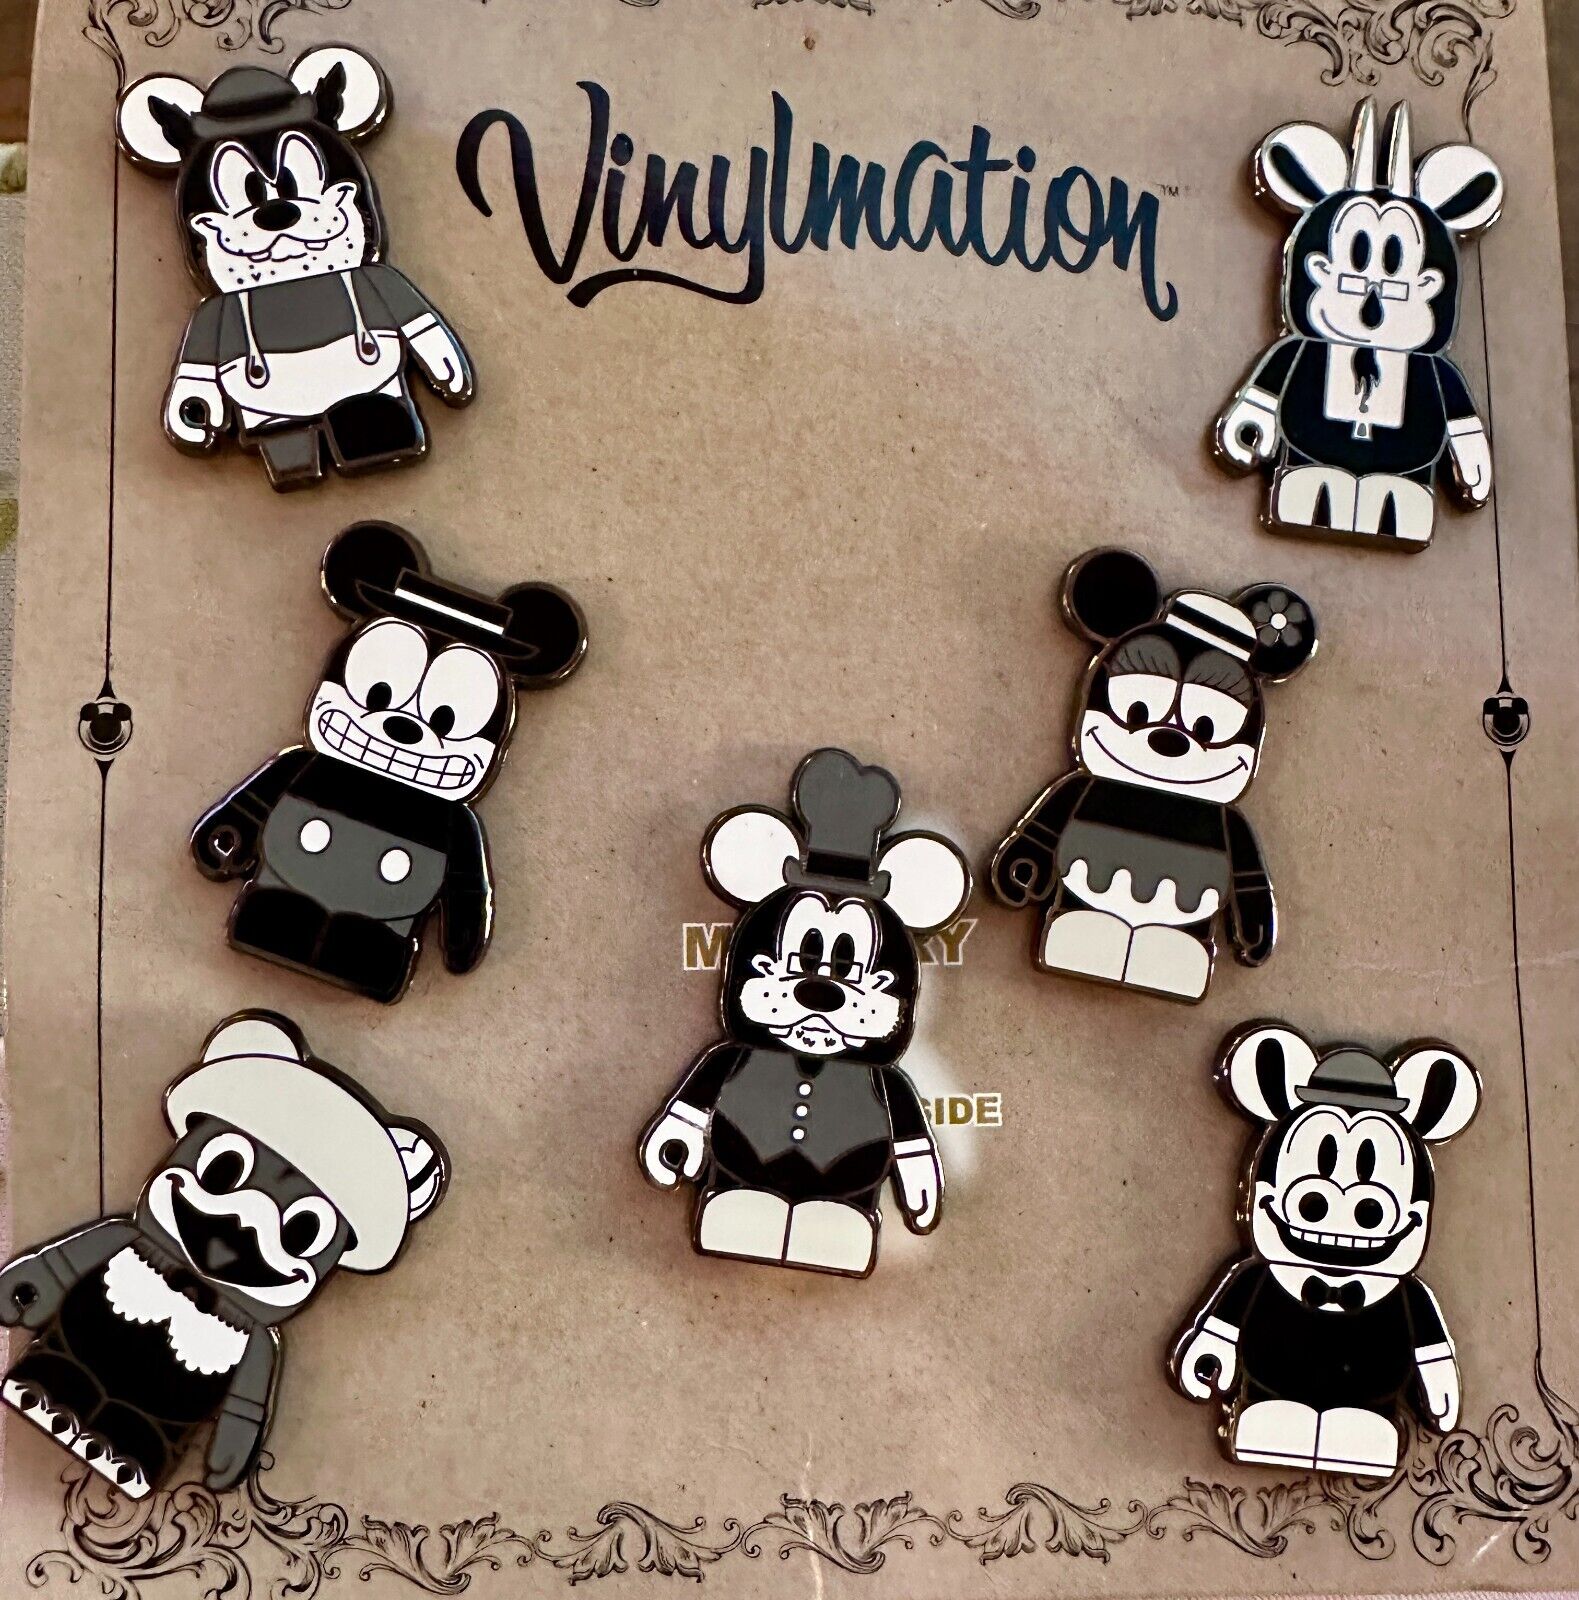 2013 Disney Classic Black & White Vinylmation 6 Pin Booster Set WITH Mystery Pin